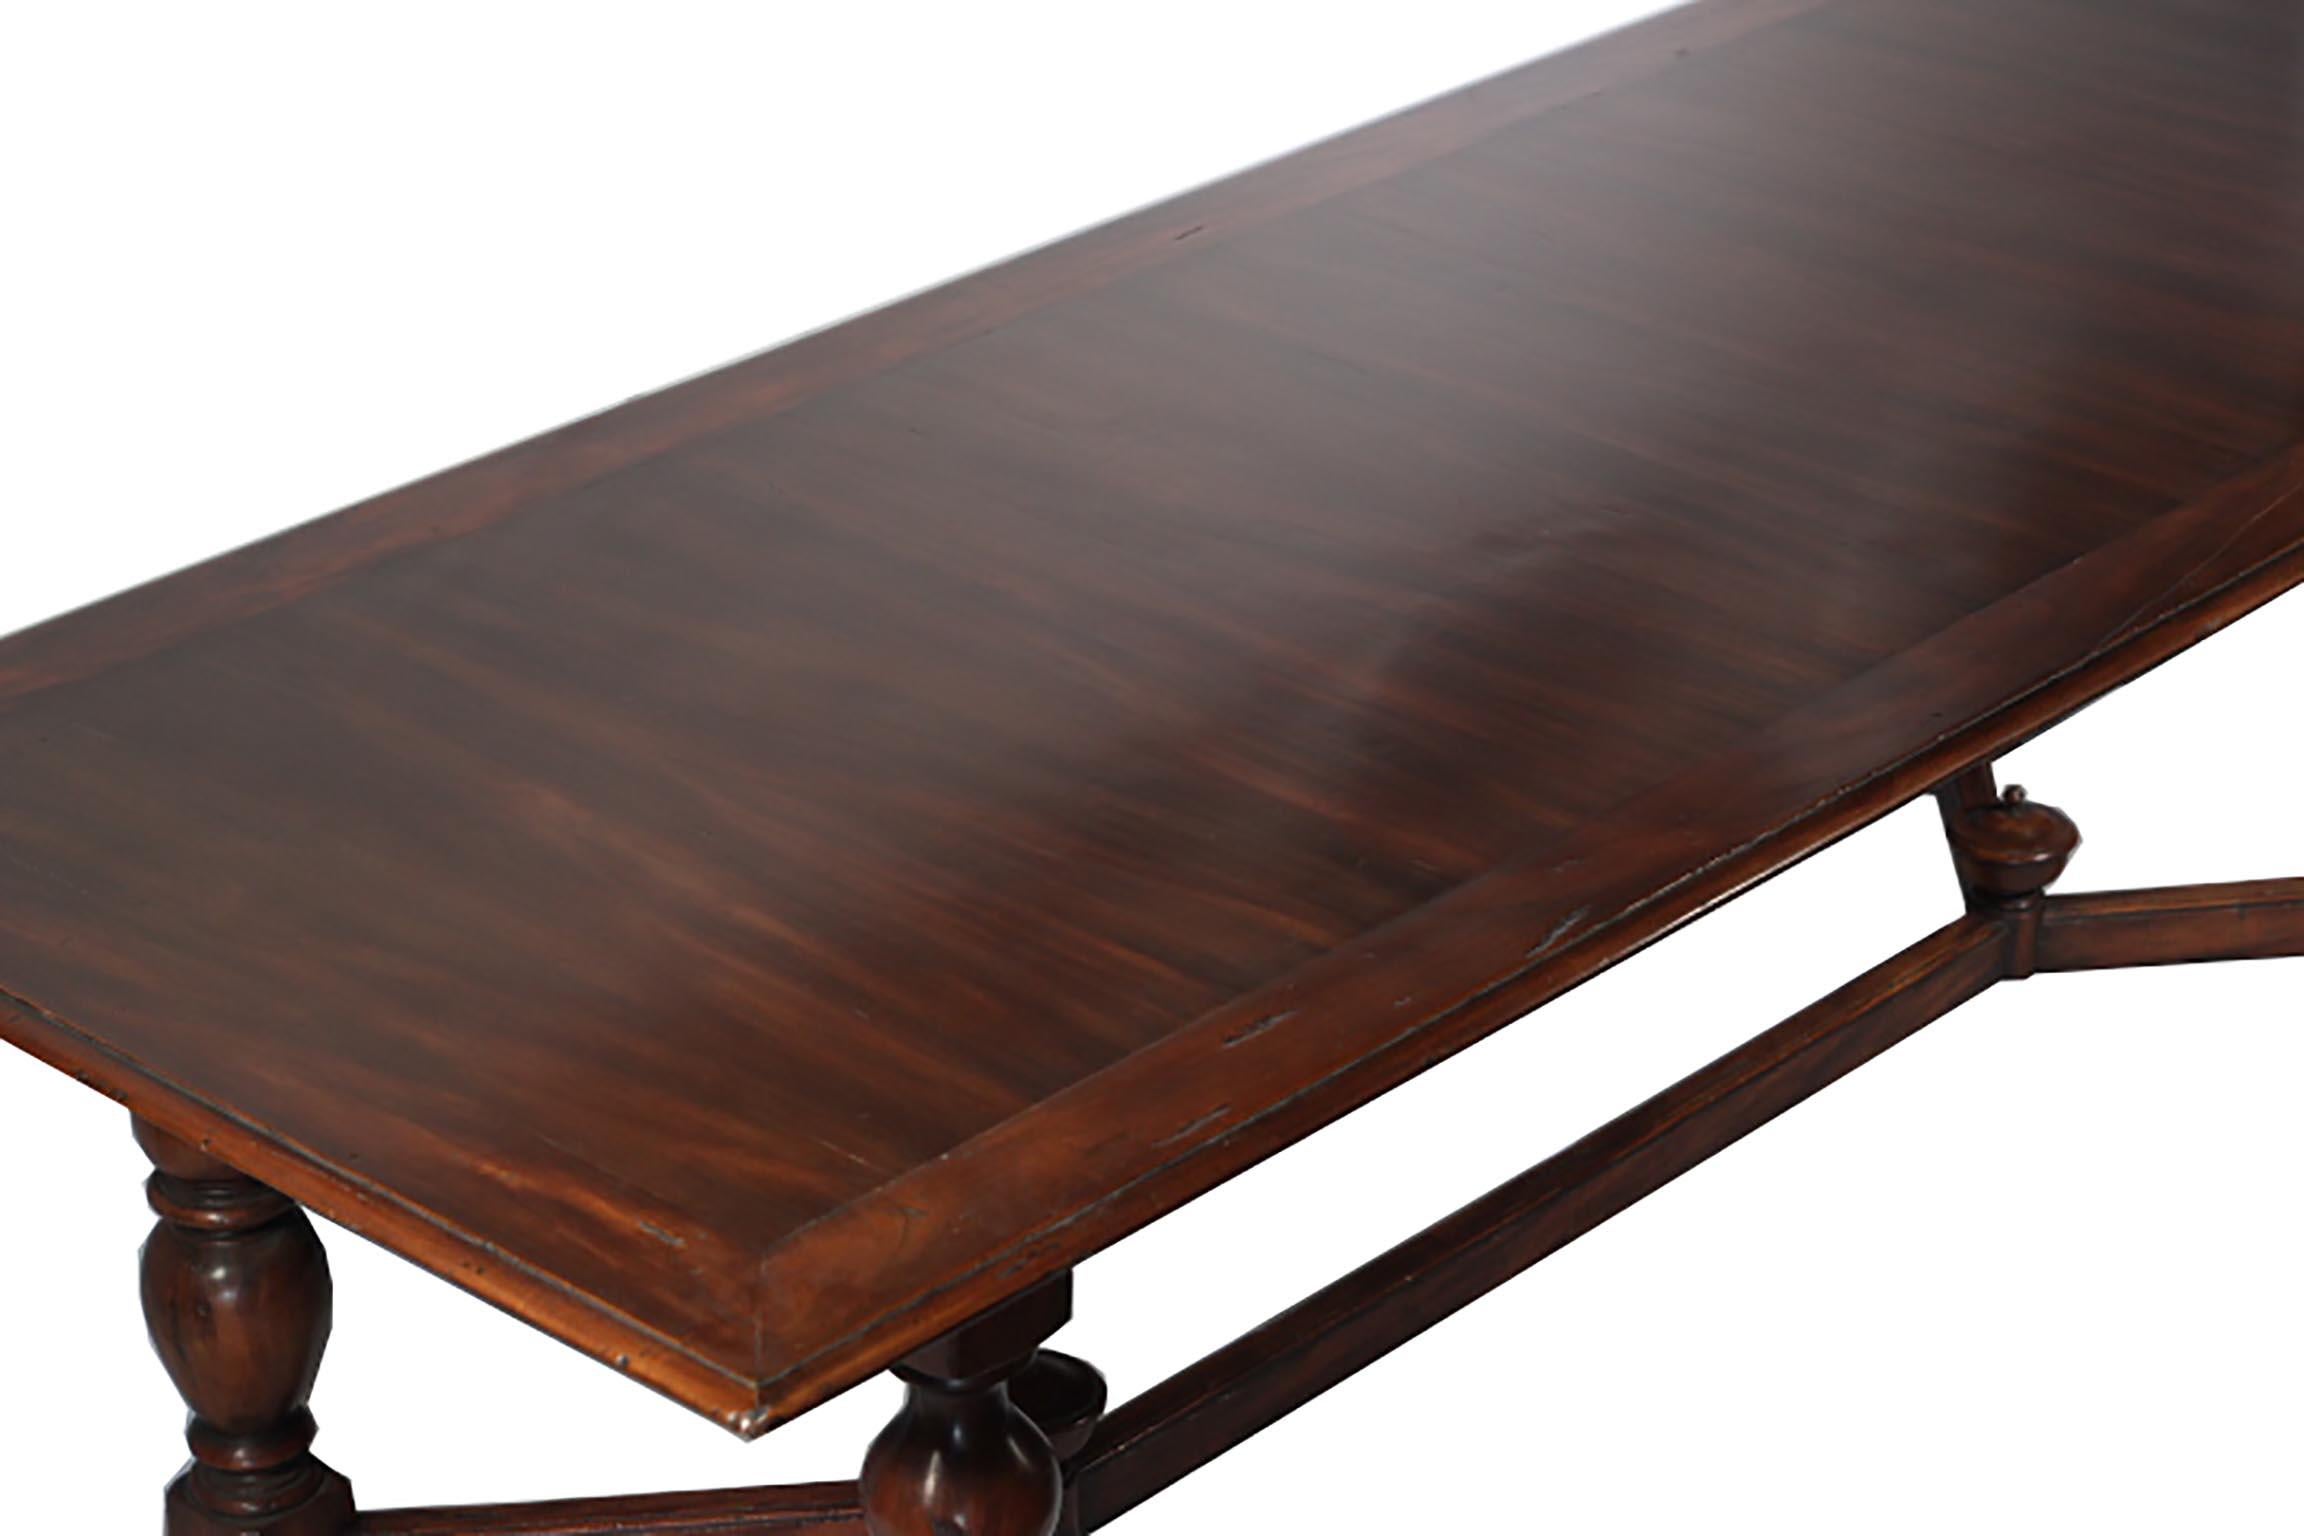 Rustic Large Alfonso Marina Handcrafted Dining Table, circa 2003